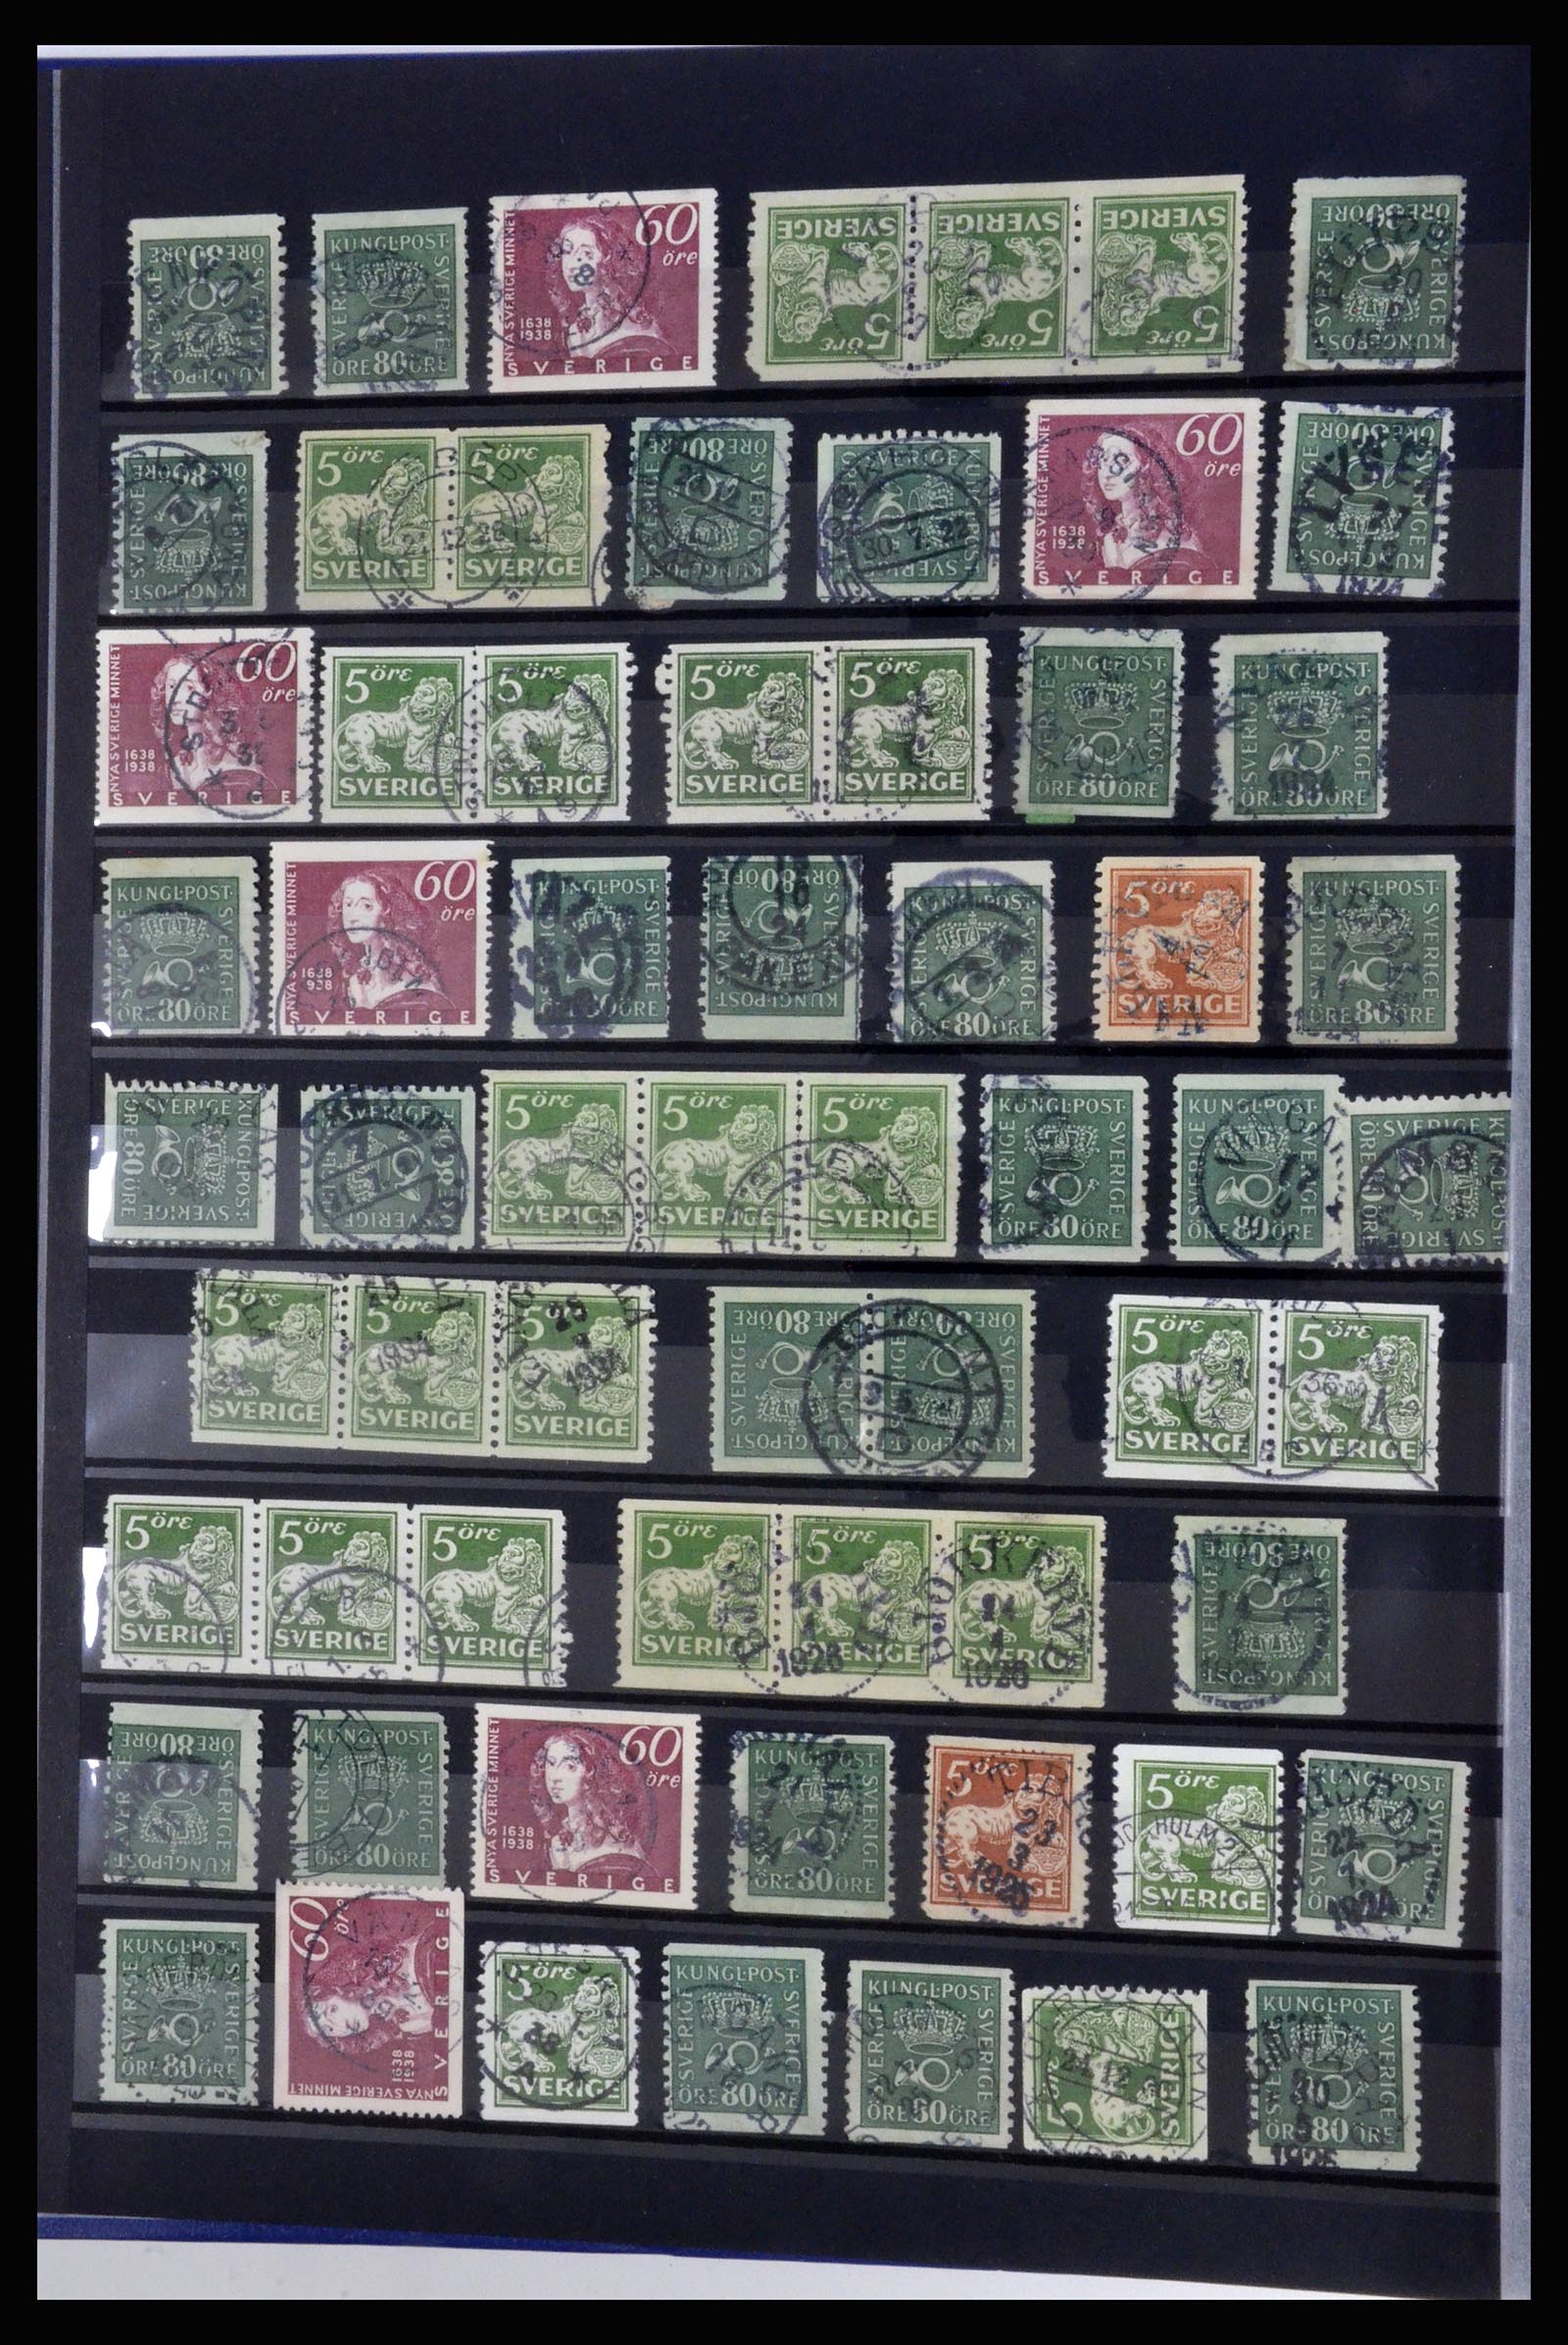 36316 012 - Stamp collection 36316 Sweden cancellations 1920-1938.